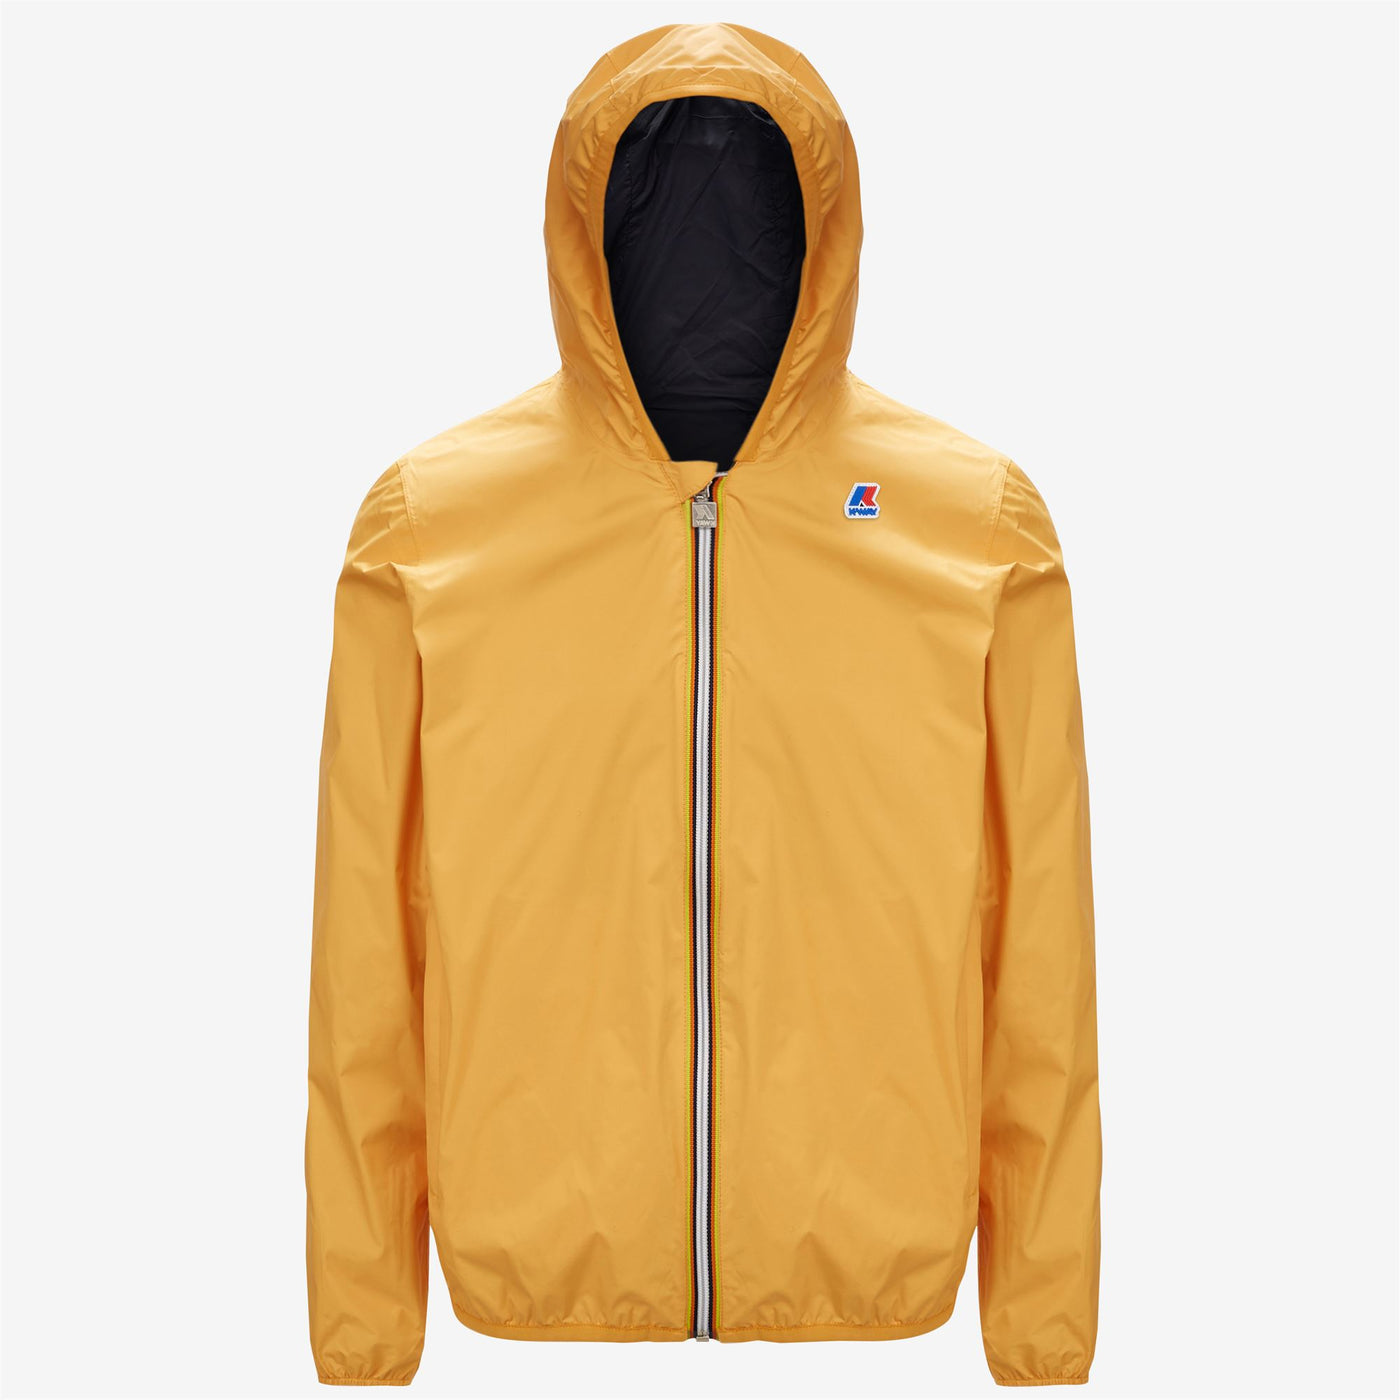 Jackets Man JACQUES PLUS.2 DOUBLE Short YELLOW LT -BLUE DEPHT | kway Dressed Front (jpg Rgb)	